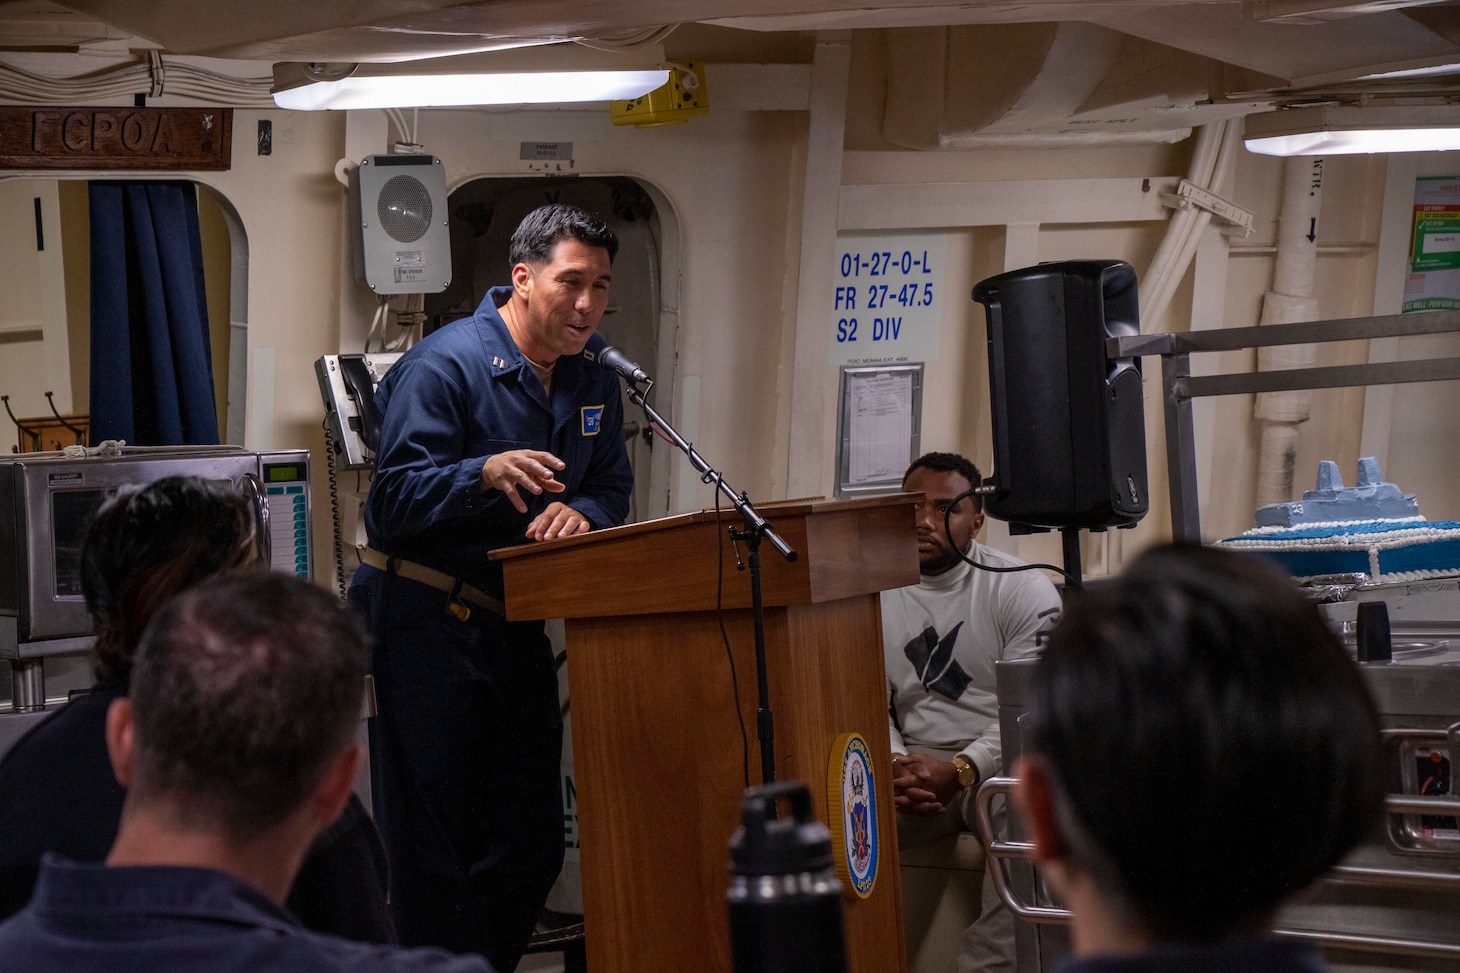 Lt. Daniel Muniz speaks about what amphibious transport dock USS Anchorage’s (LPD 23) motto, “Nil Fato Relinquemus (We leave nothing to chance)” means to him during a ceremony celebrating the 10th anniversary of Anchorage’s commissioning, May 7, 2023.